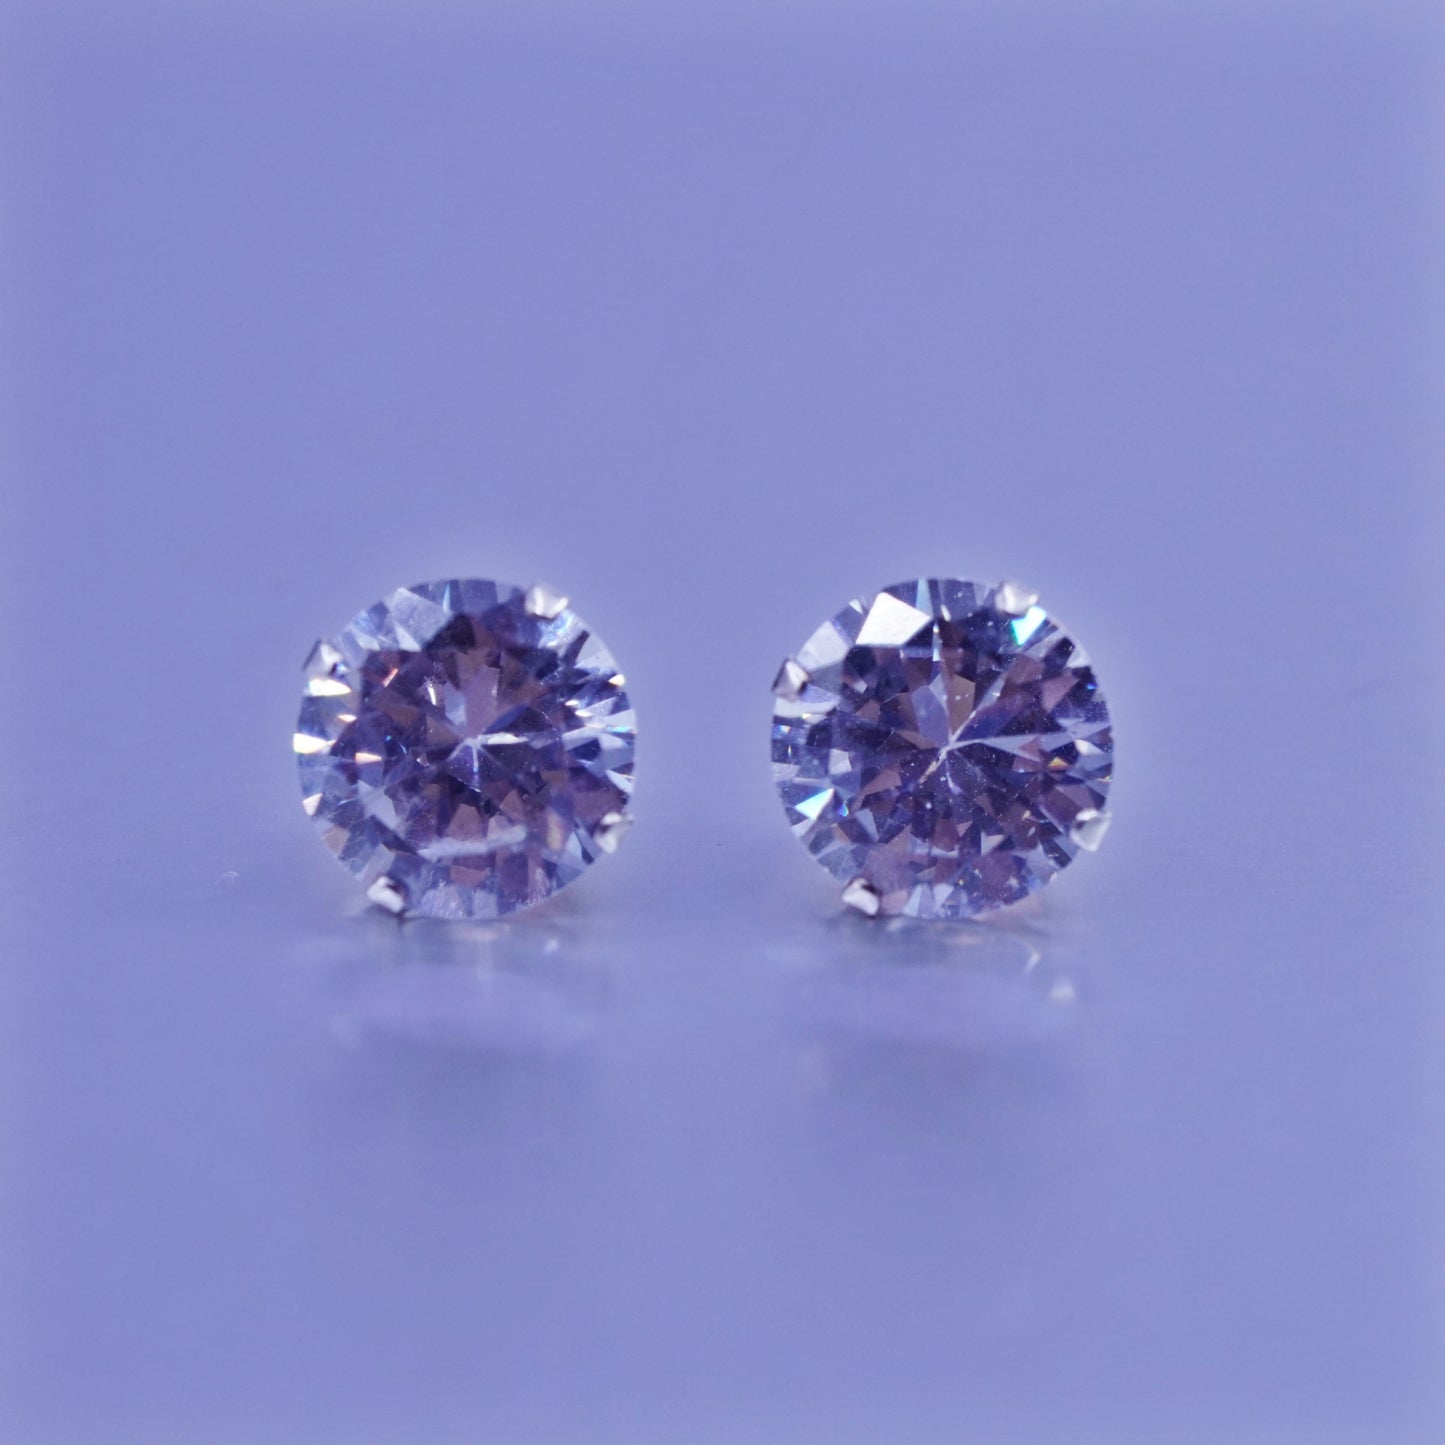 10mm Vintage Sterling 925 silver earrings, studs with round Cz inlay,